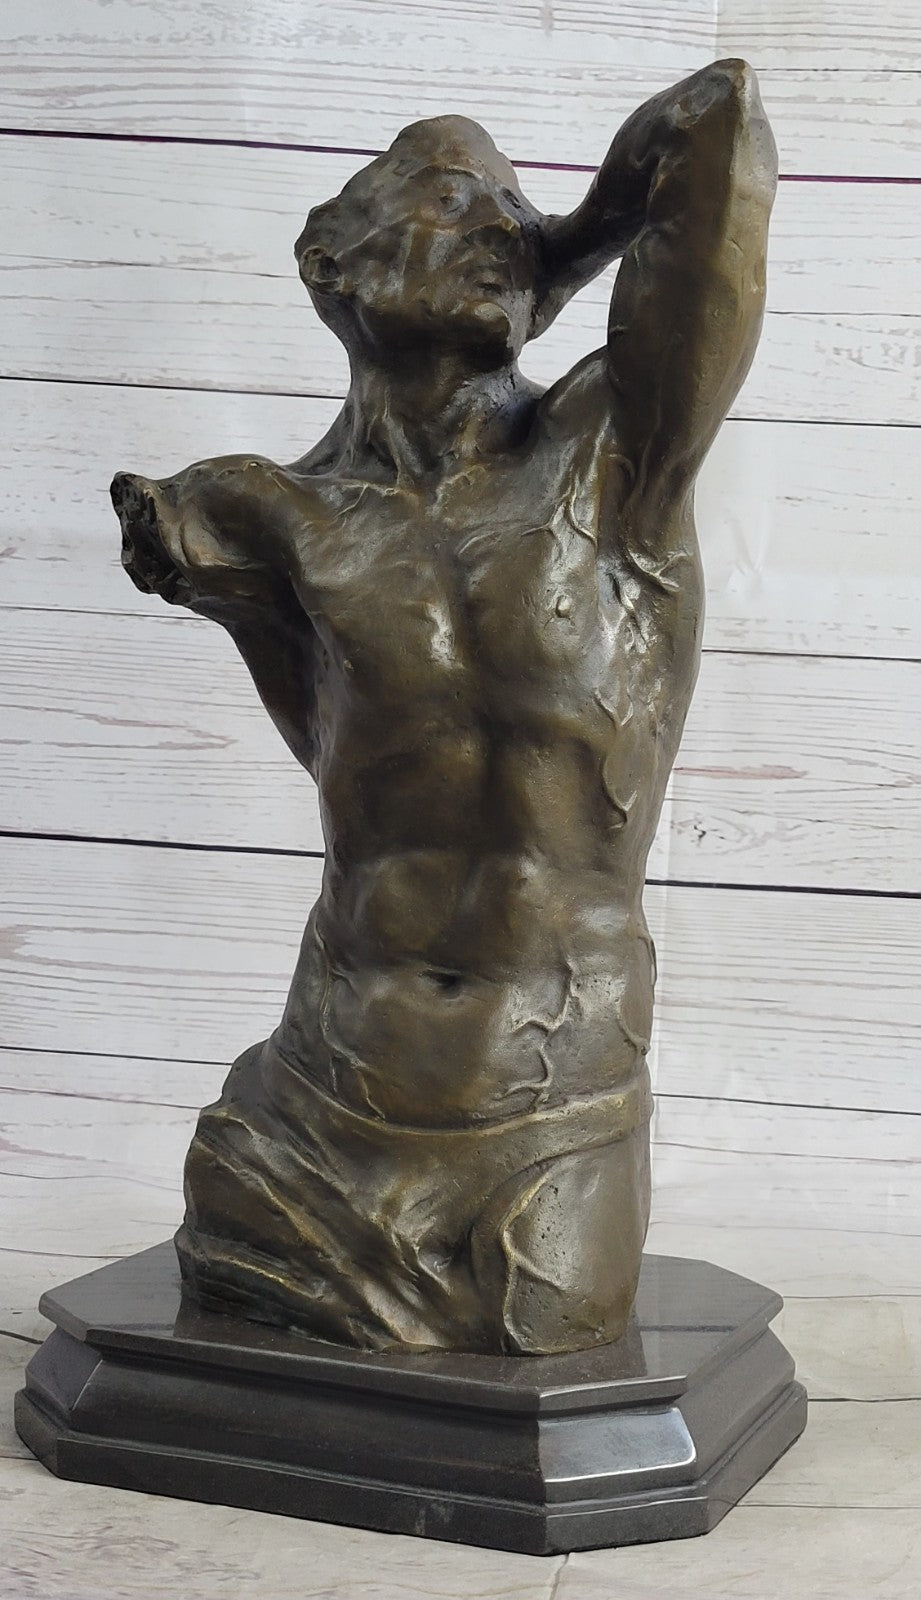 Handcrafted bronze sculpture SALE  Male Abstract Cast Hot Original Signed Figurine